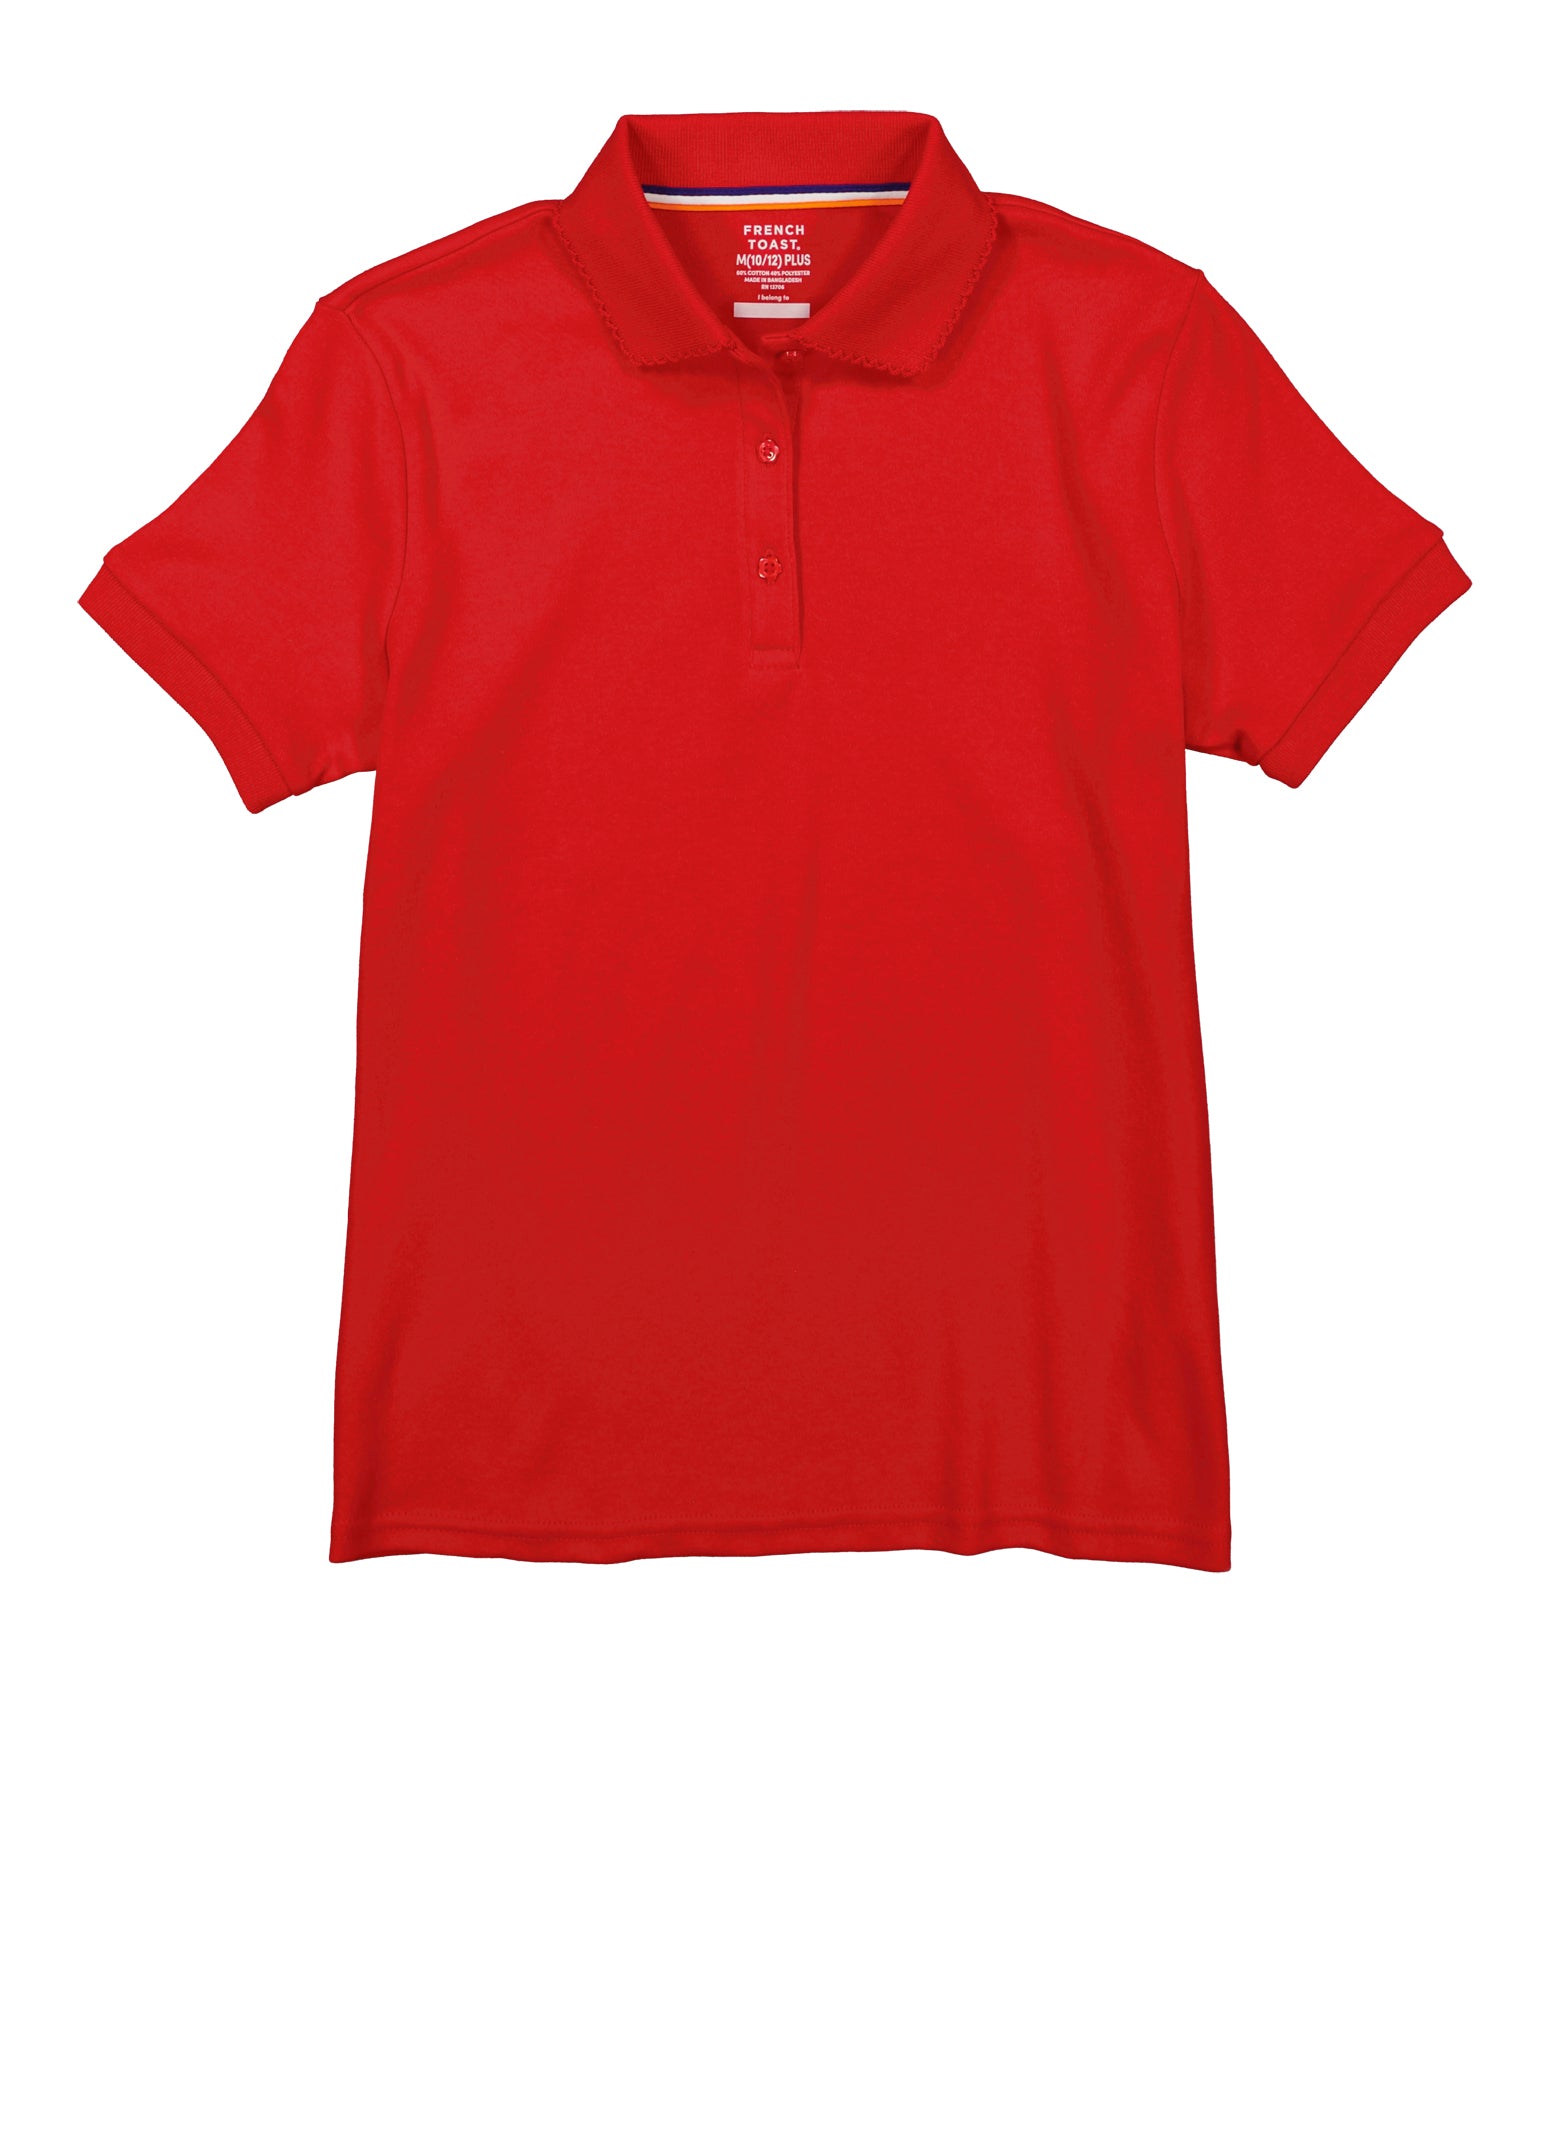 French Toast Girls Plus Size 10.5-20.5 Picot Collar Polo, Red, Size 10-12P